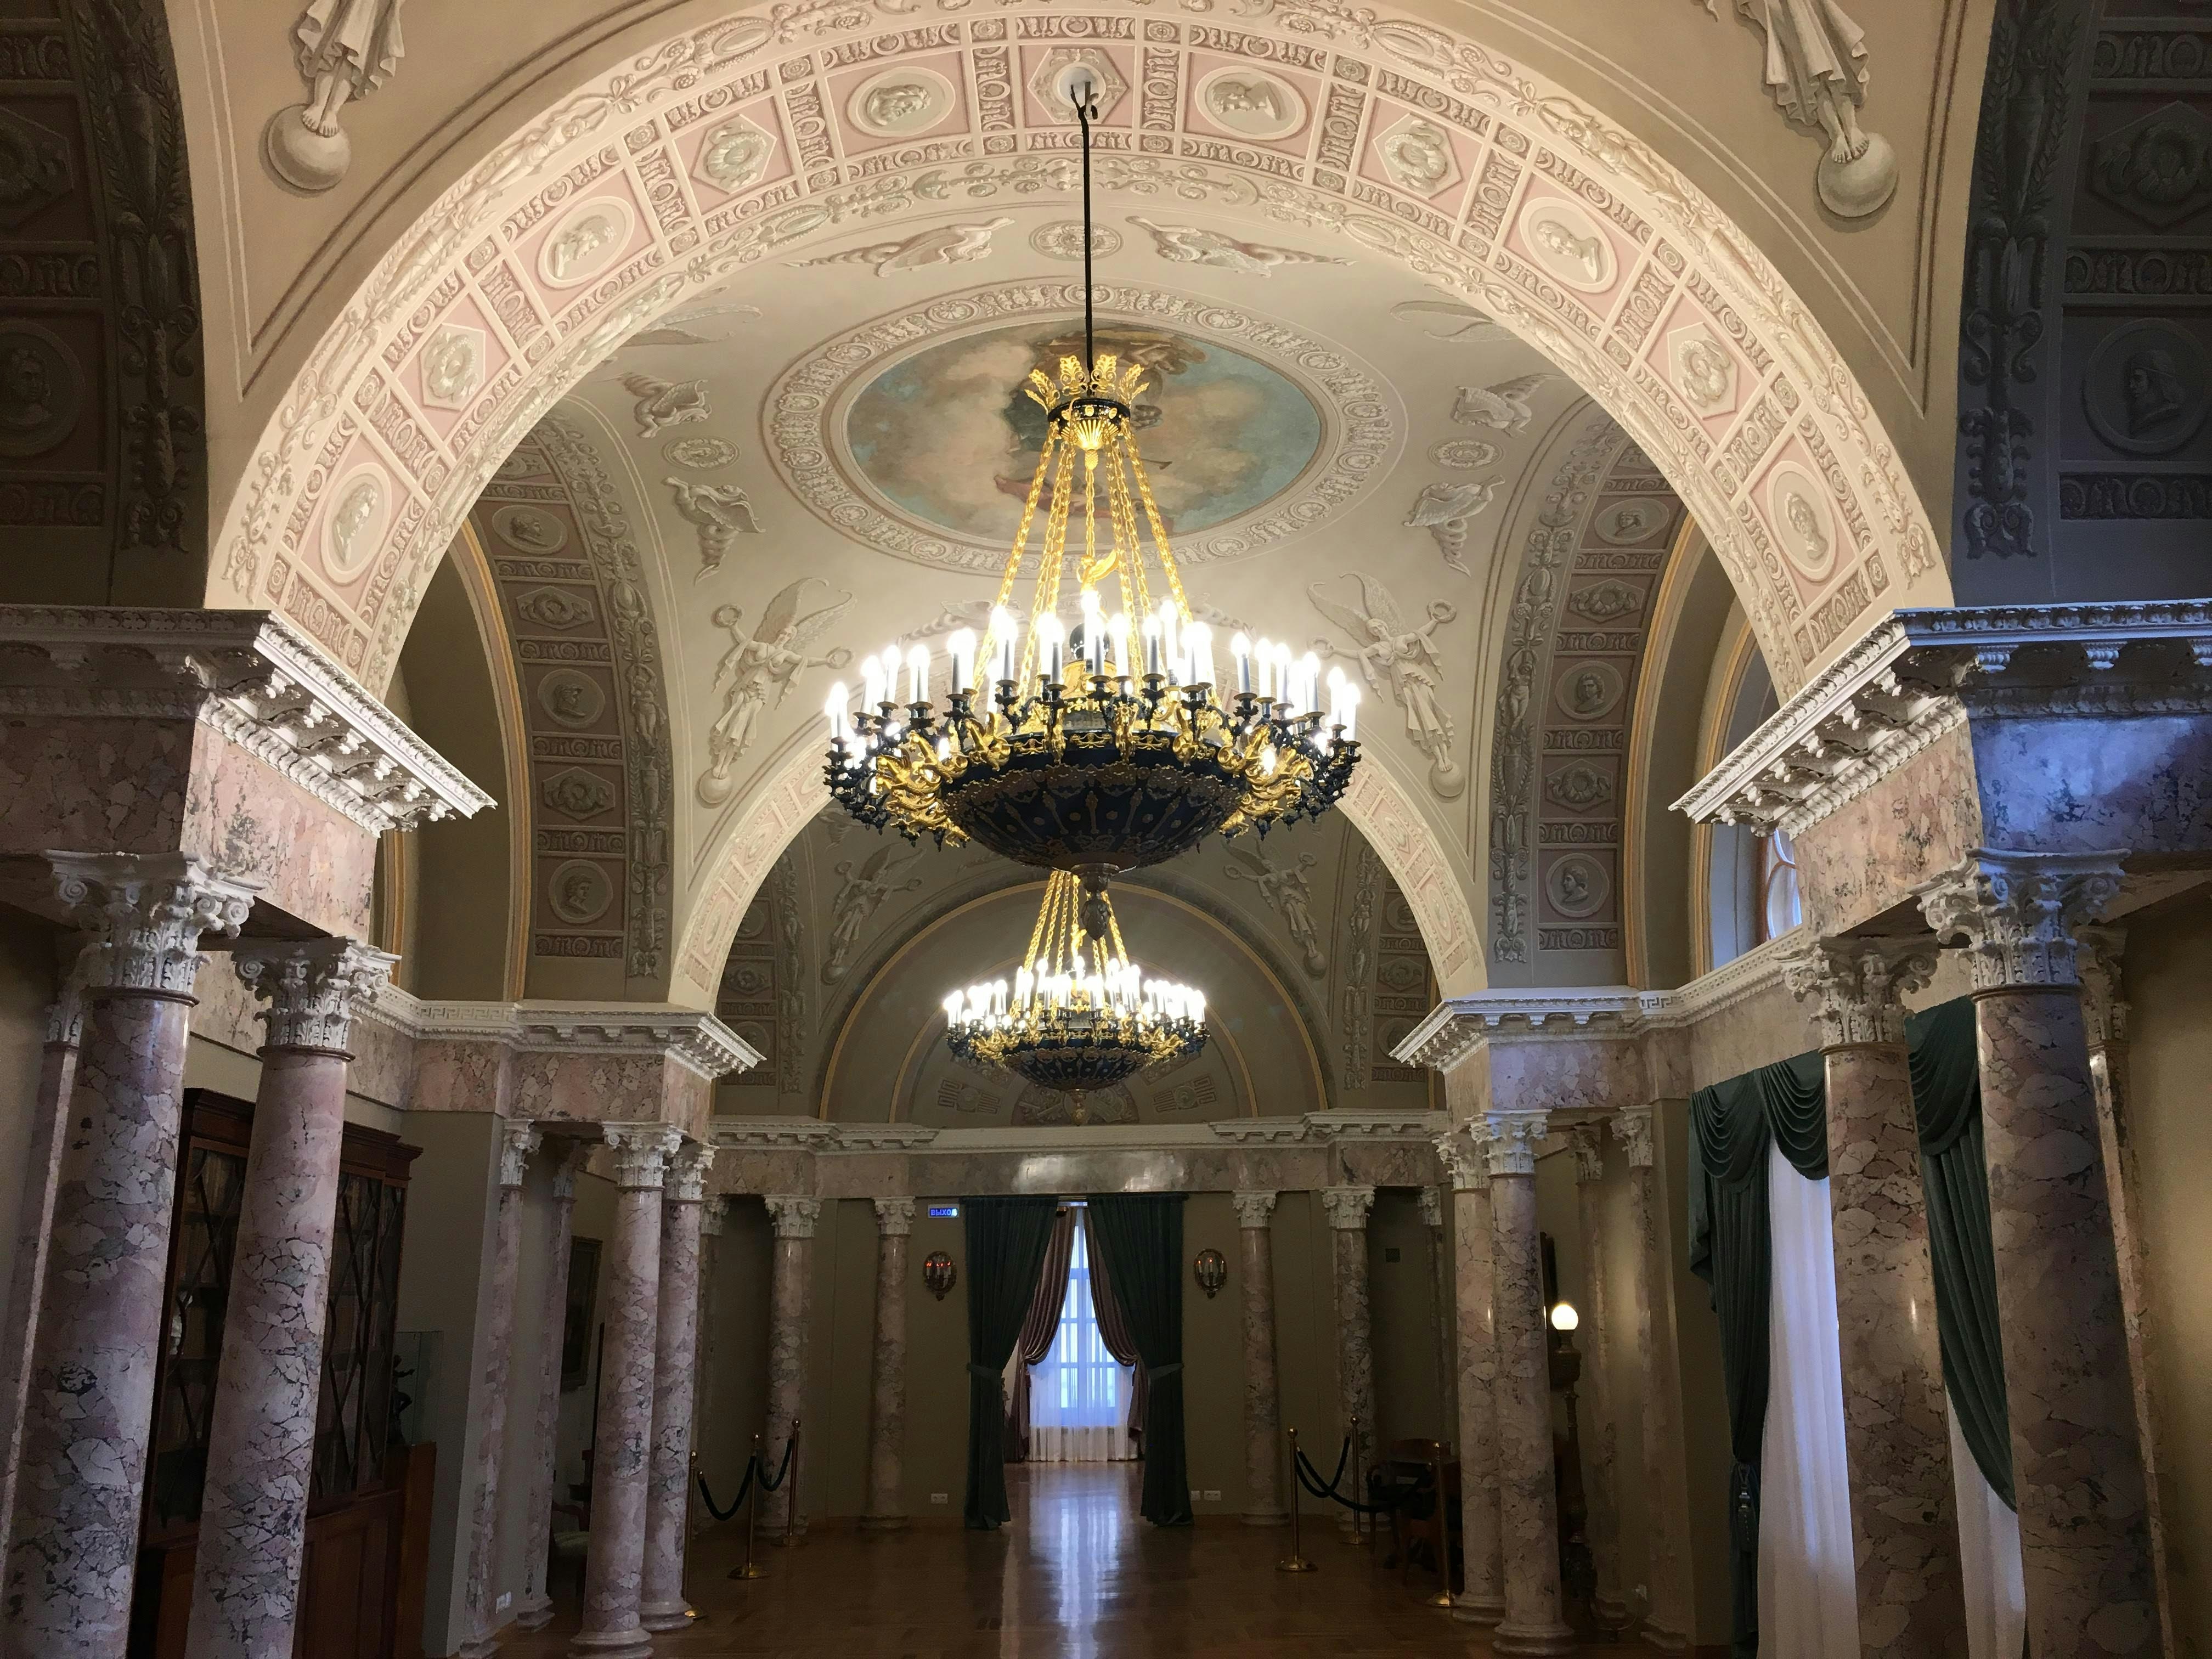 A grand hallway lined with marble columns, with an arched ceiling covered in paintings and motifs. Two large chandeliers hang down from the vaulted ceiling. 